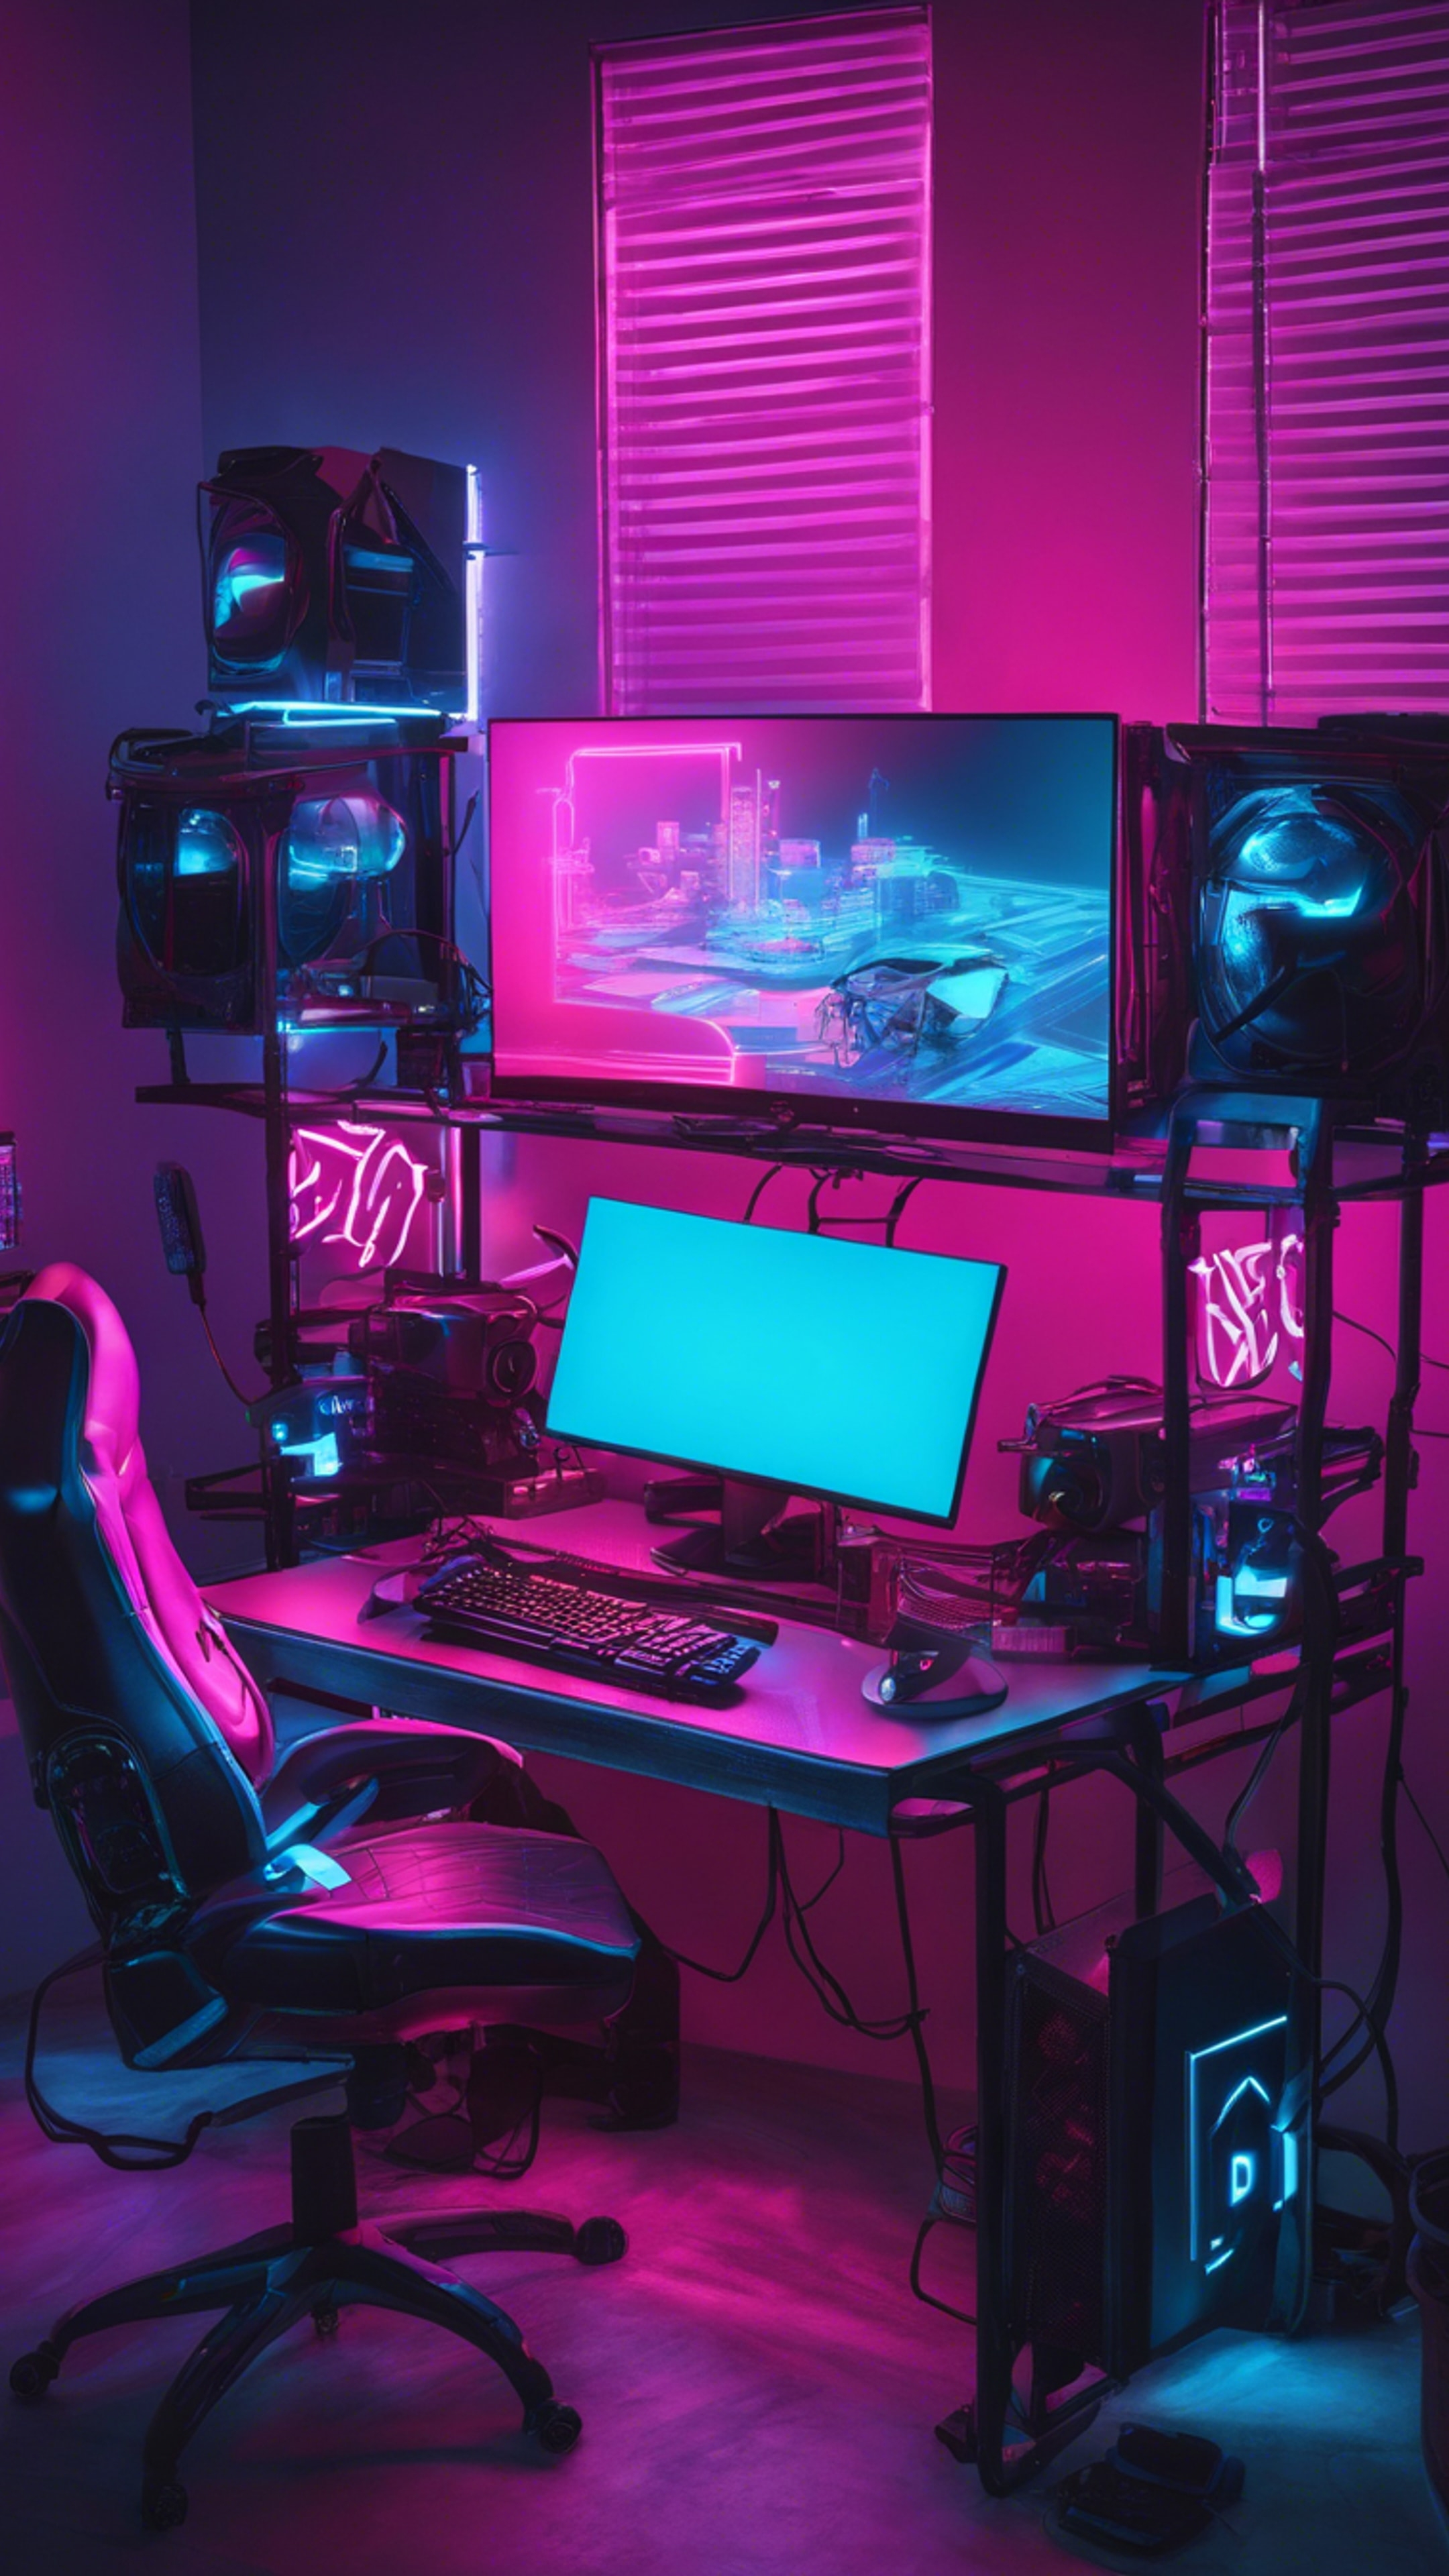 A neon blue gaming setup with a high-end PC, LED keyboard and a gaming monitor. Hintergrund[173ea11d79a5456c932c]